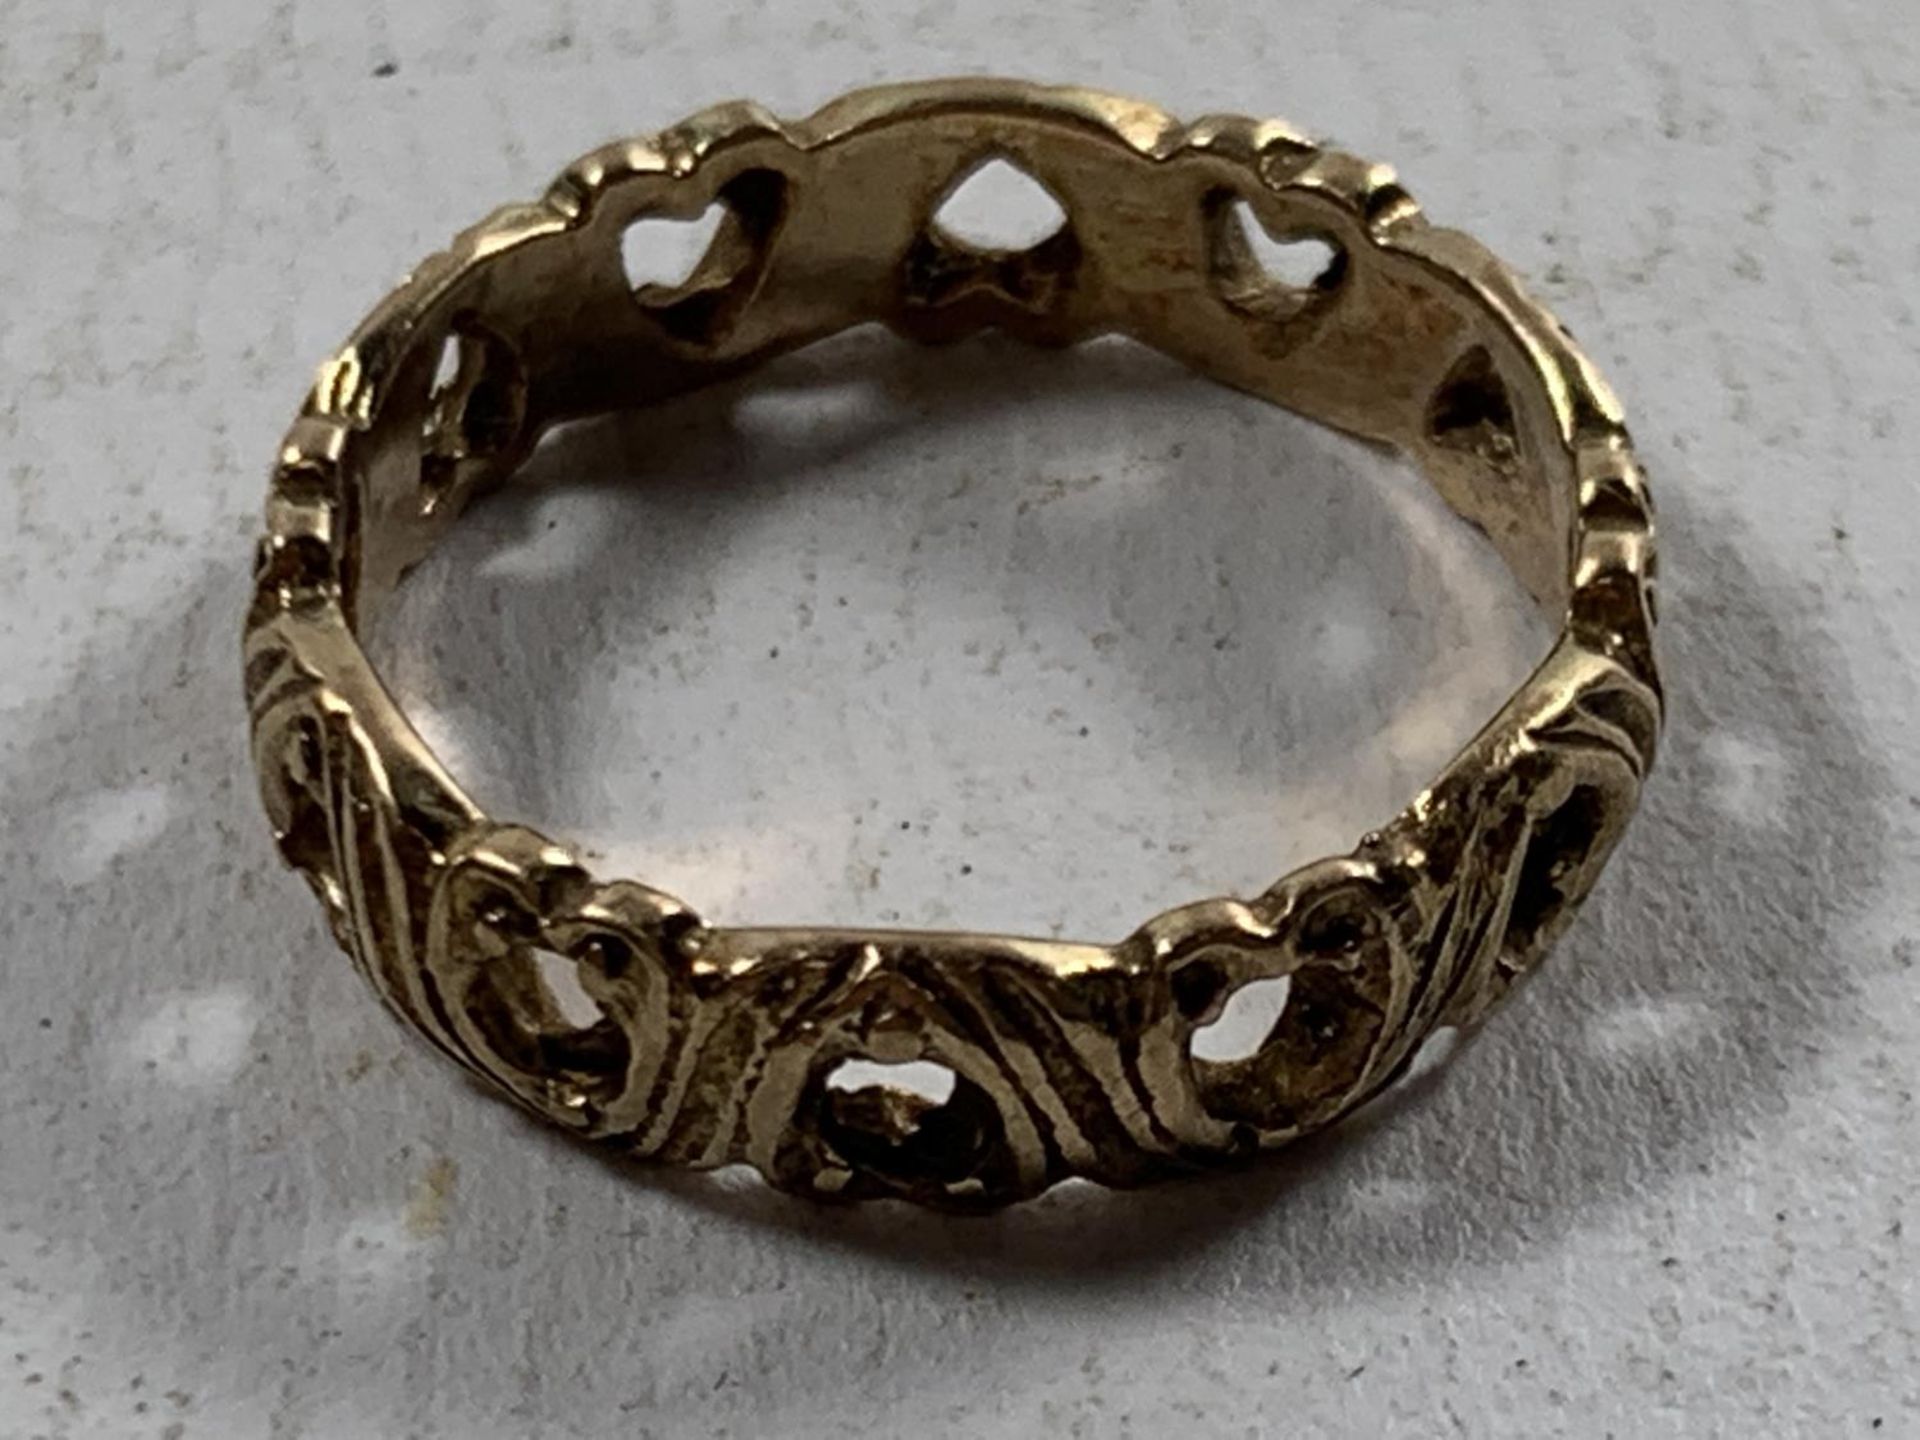 A 9 CARAT GOLD RING WITH HEART DESIGN SIZE J/K GROSS WEIGHT 1.89 GRAMS - Image 2 of 3